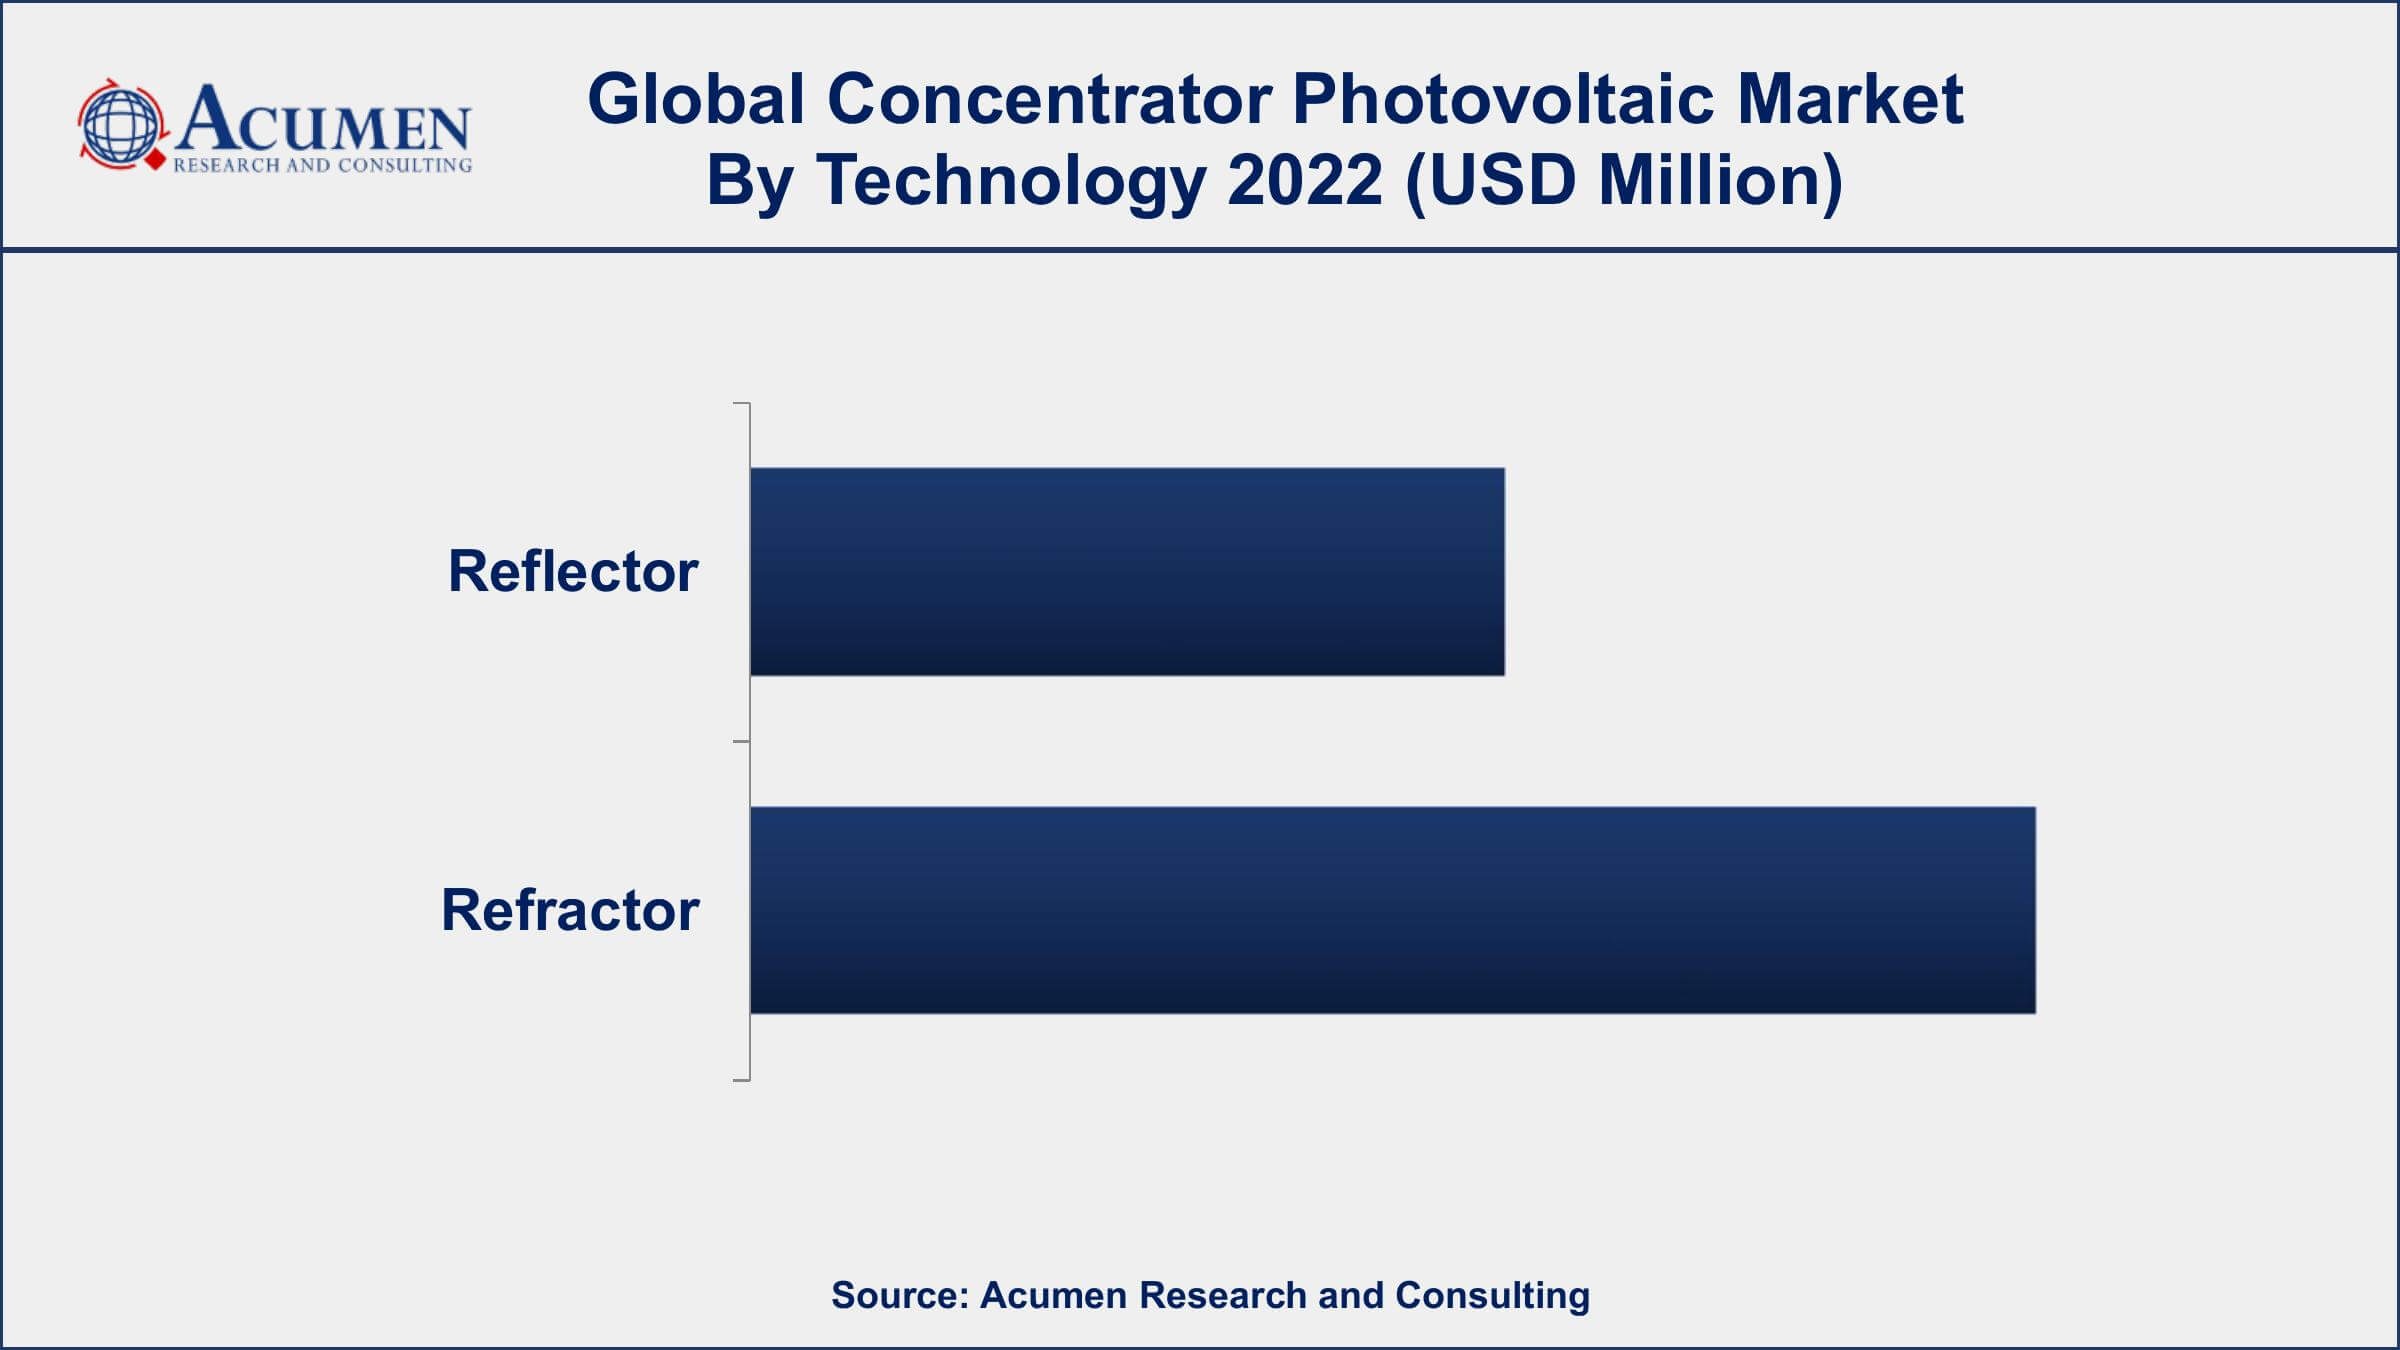 Concentrator Photovoltaic Market Dynamics 